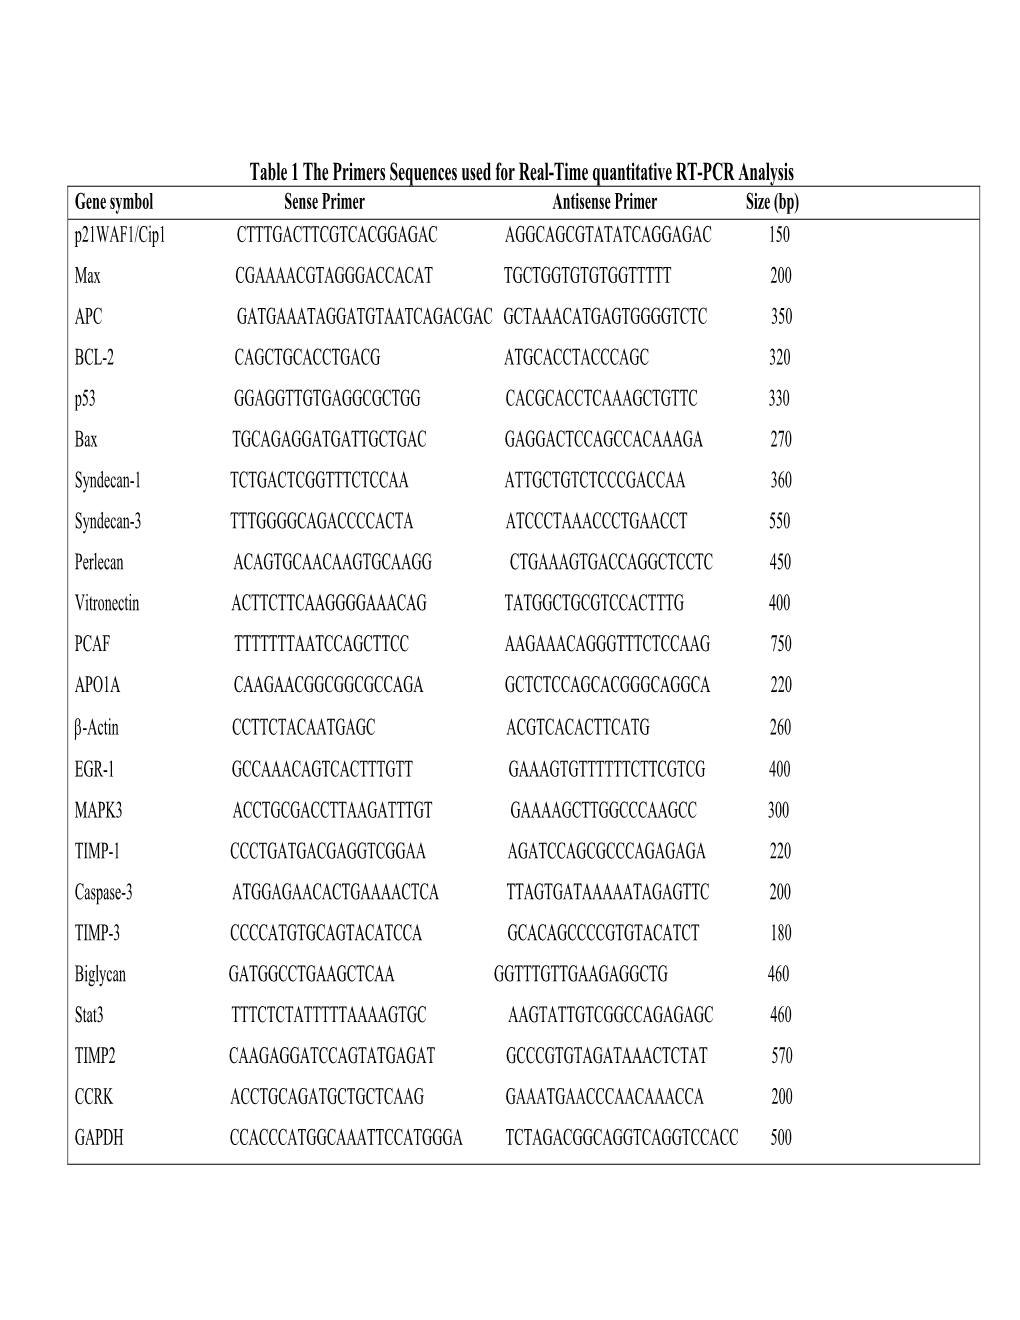 Table 1 the Primers Sequences Used for Real-Time Quantitative RT-PCR